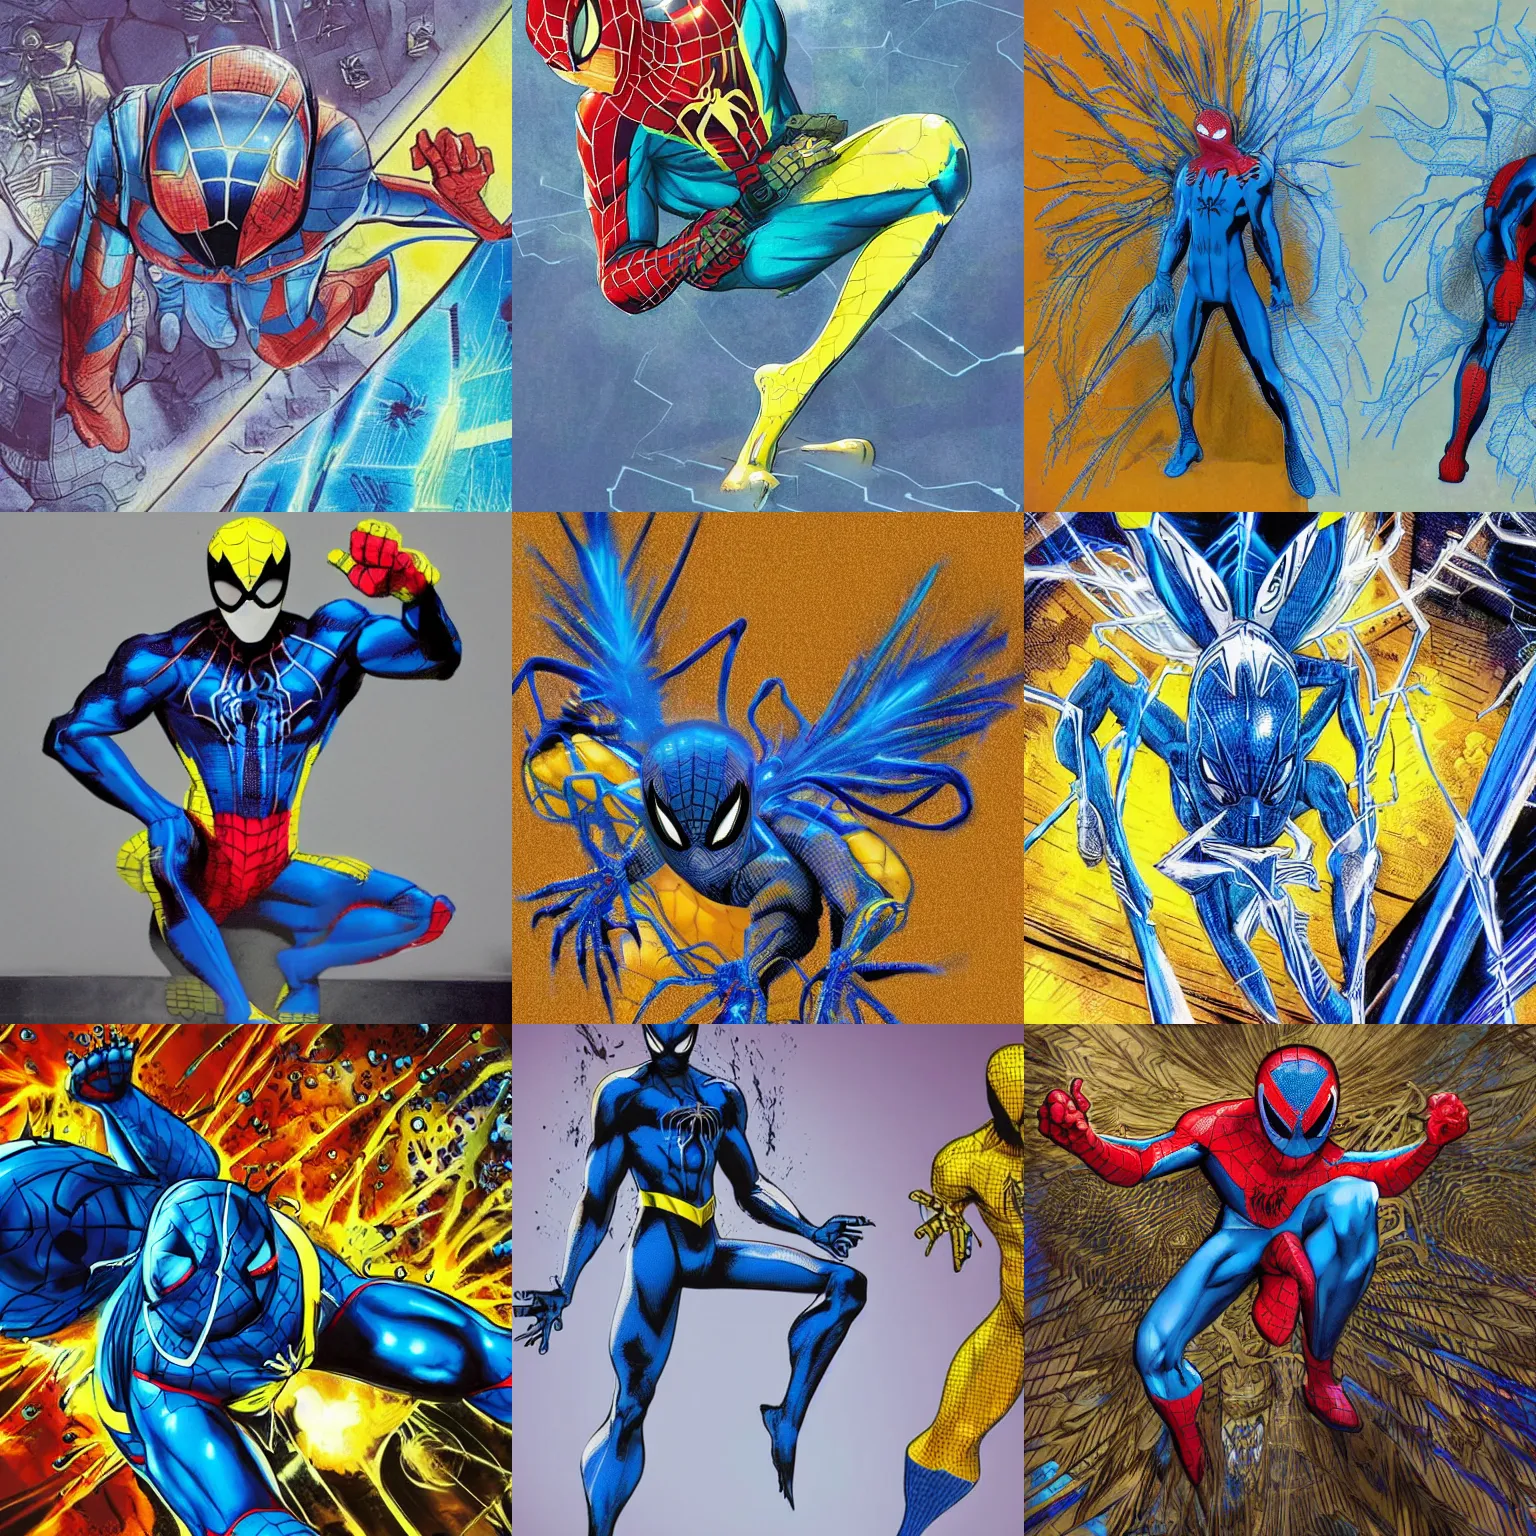 Prompt: Marvel SpiderMan, electric blue Spider-Man inspired by a peacock ((tarantula)), official concept art, blue and yellow spiderman, blue accents